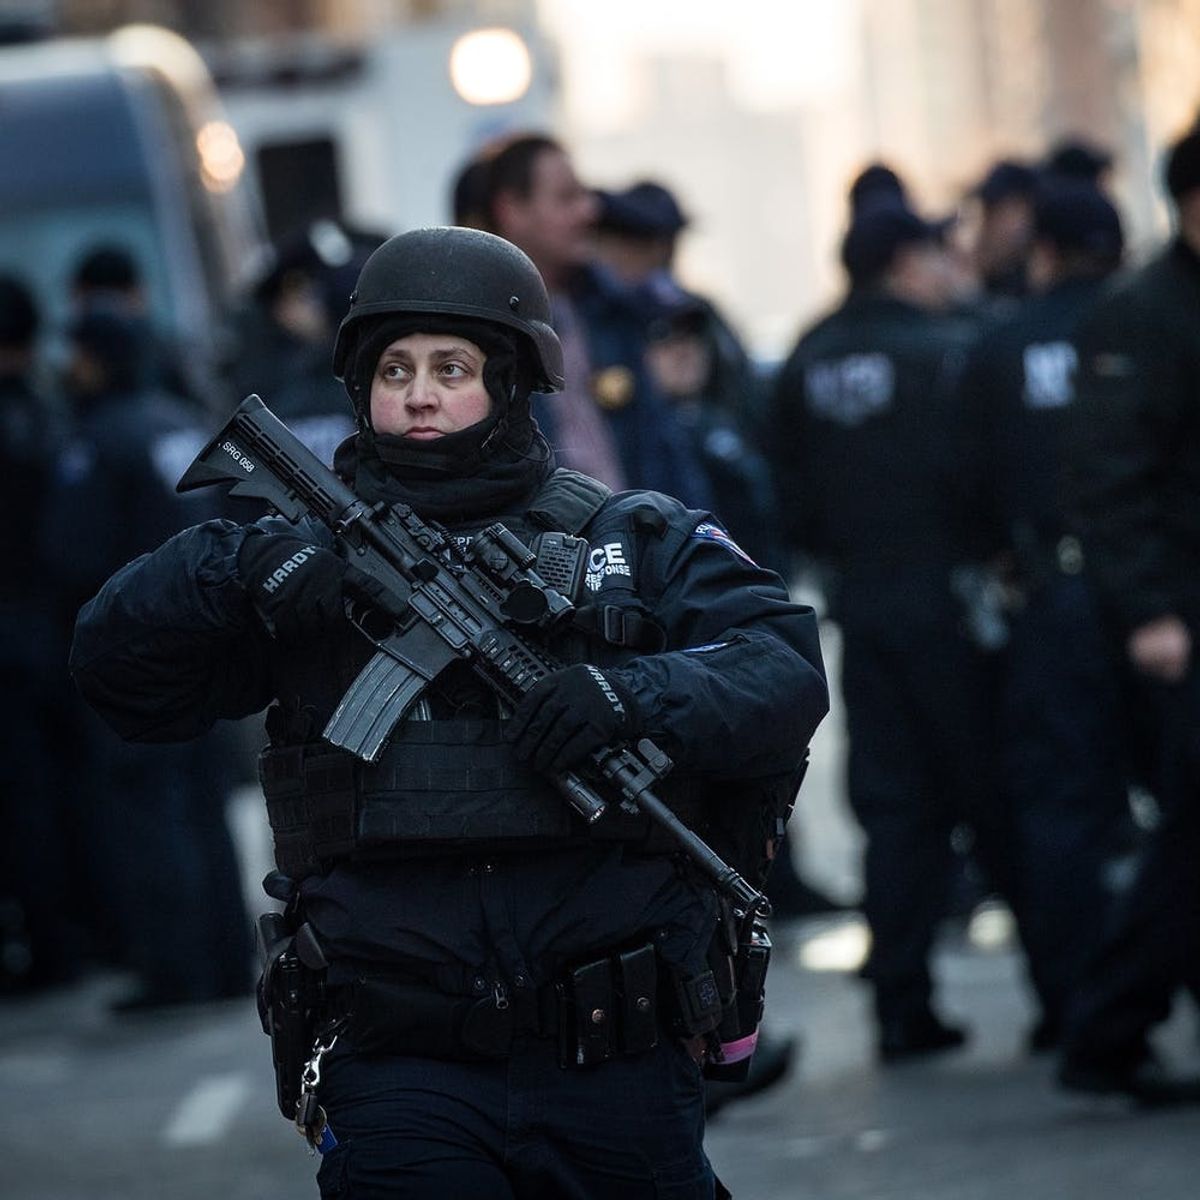 New York City Subways Are in Recovery After an Attempted Terrorist Attack